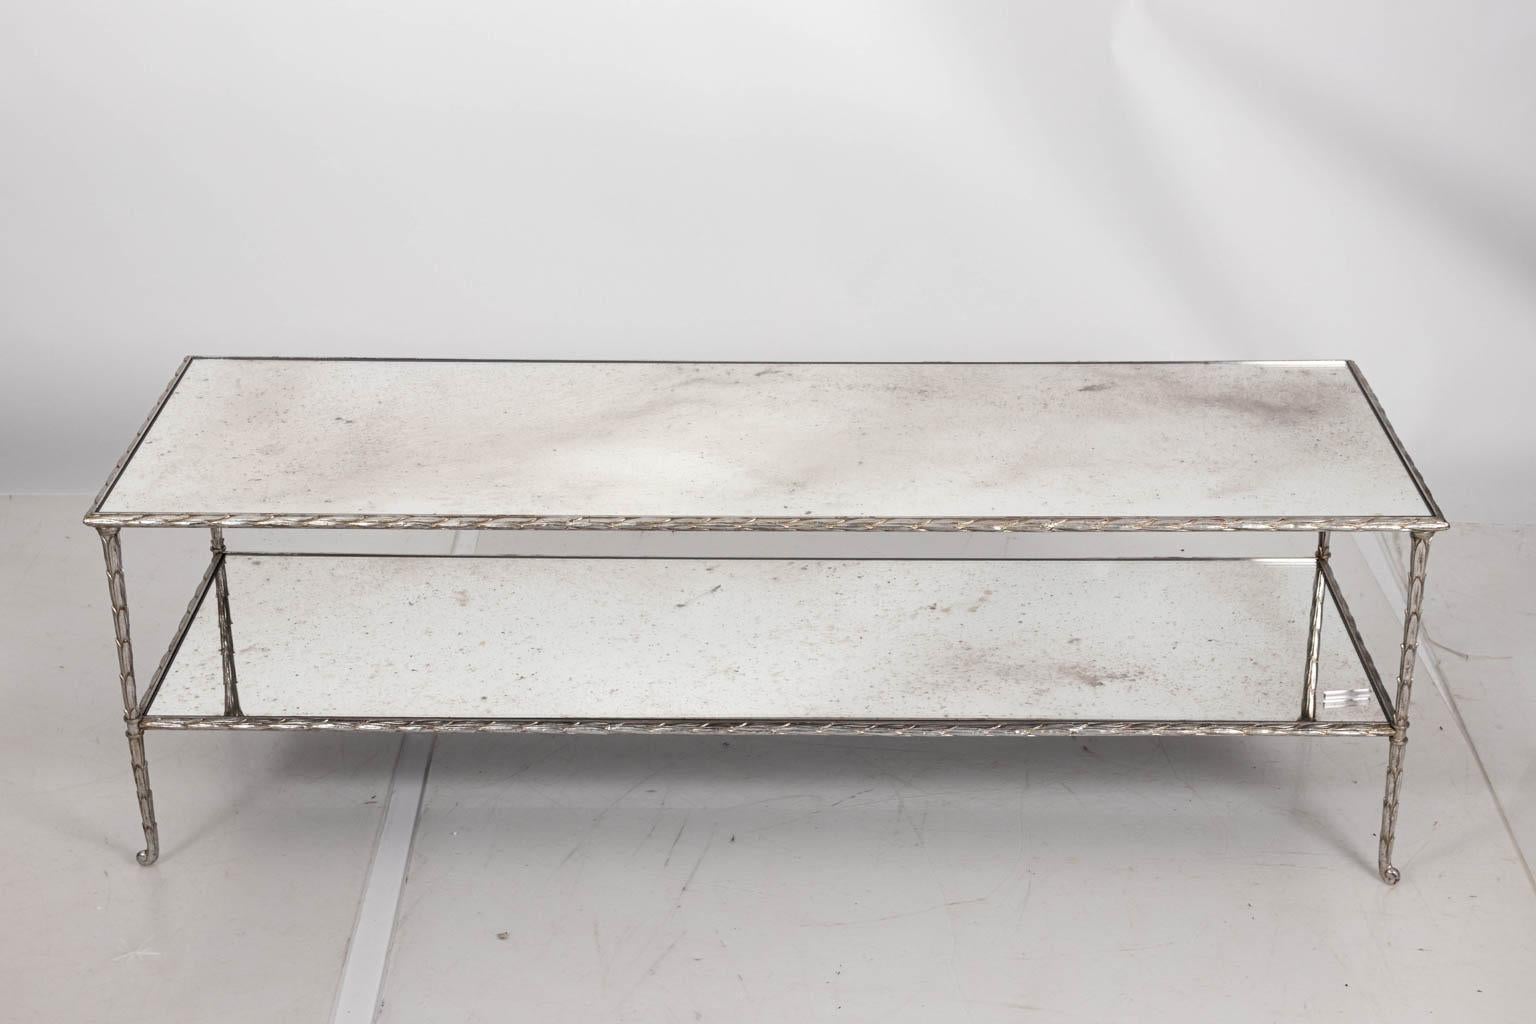 Two tier coffee table with silver leaf metal frame and mirrored glass top inserts. Please note of wear consistent with age including oxidation to the mirror plates and a distressed finish to the silver gilt.